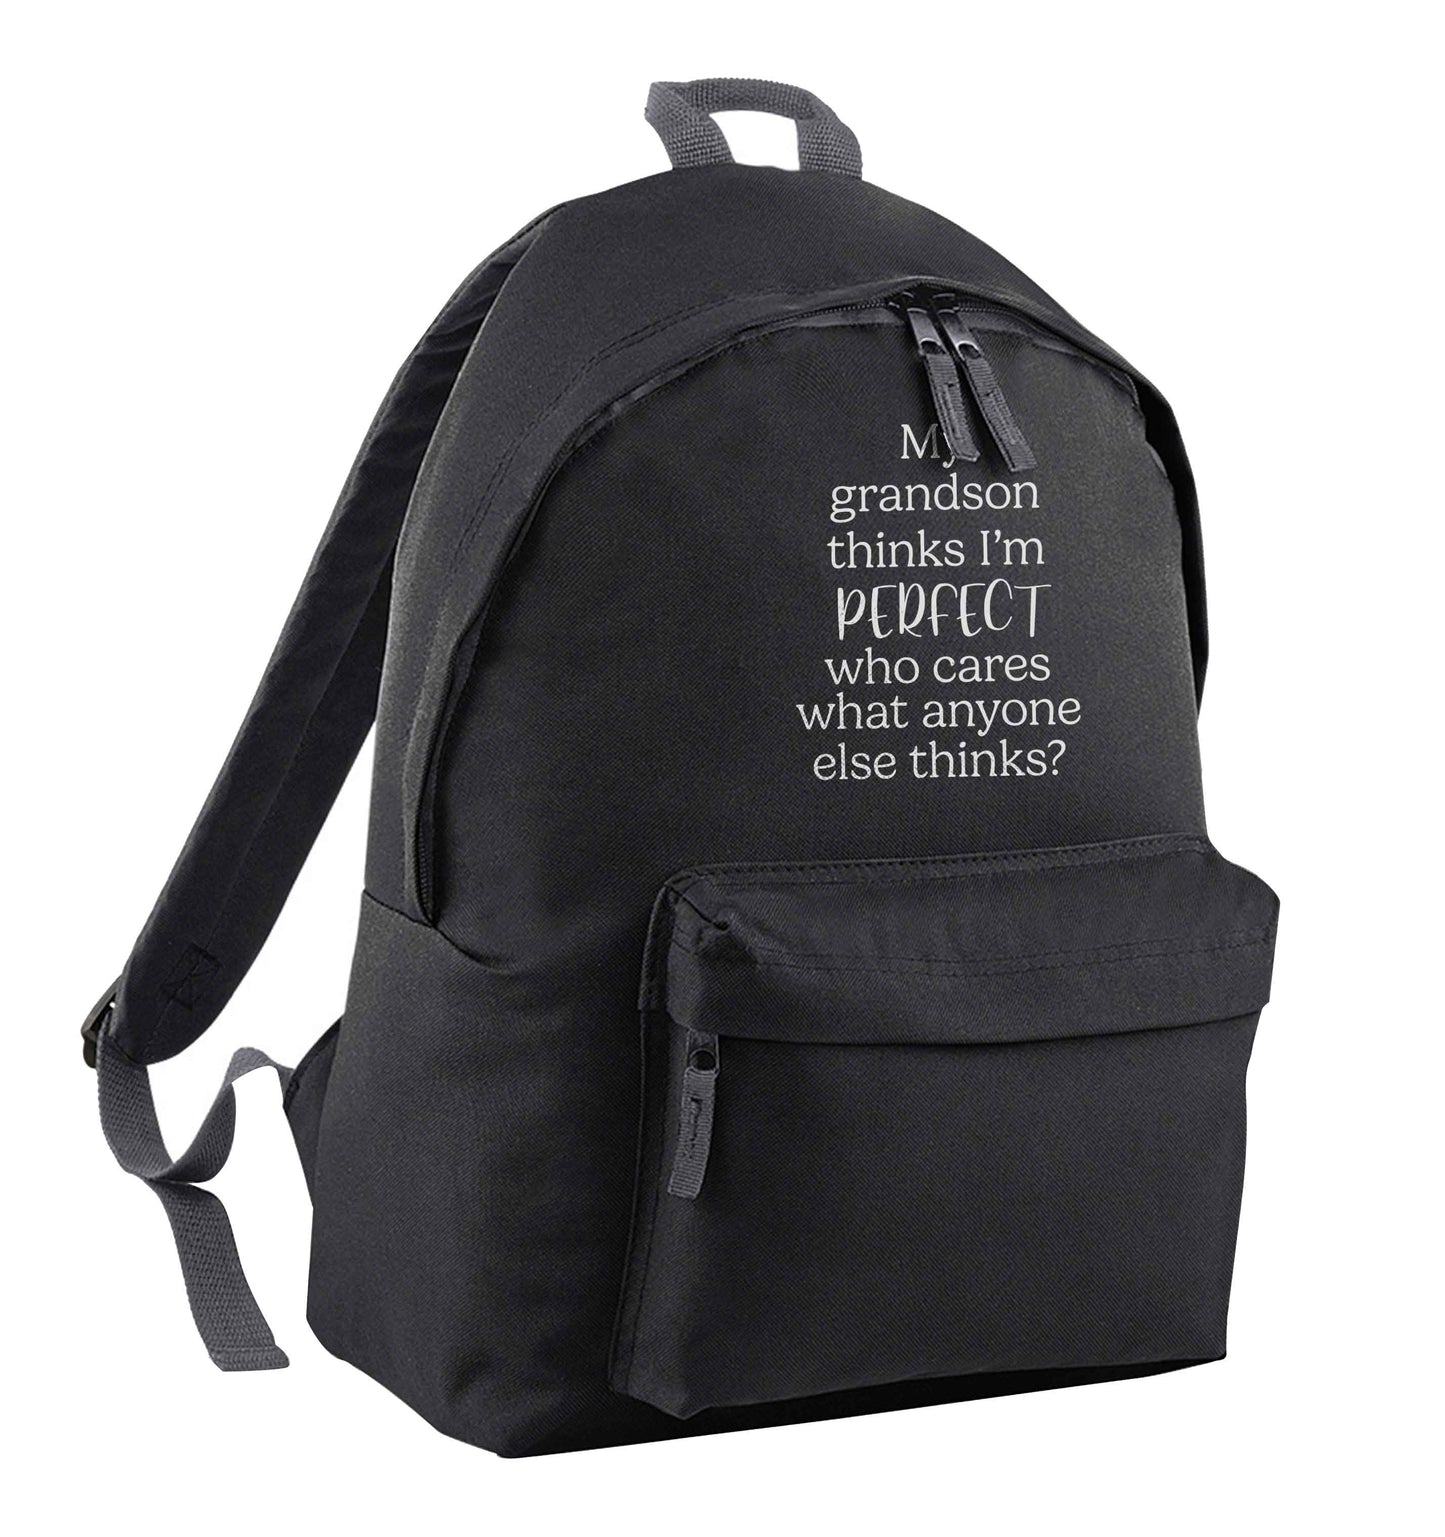 My Grandson thinks I'm perfect who cares what anyone else thinks? black adults backpack